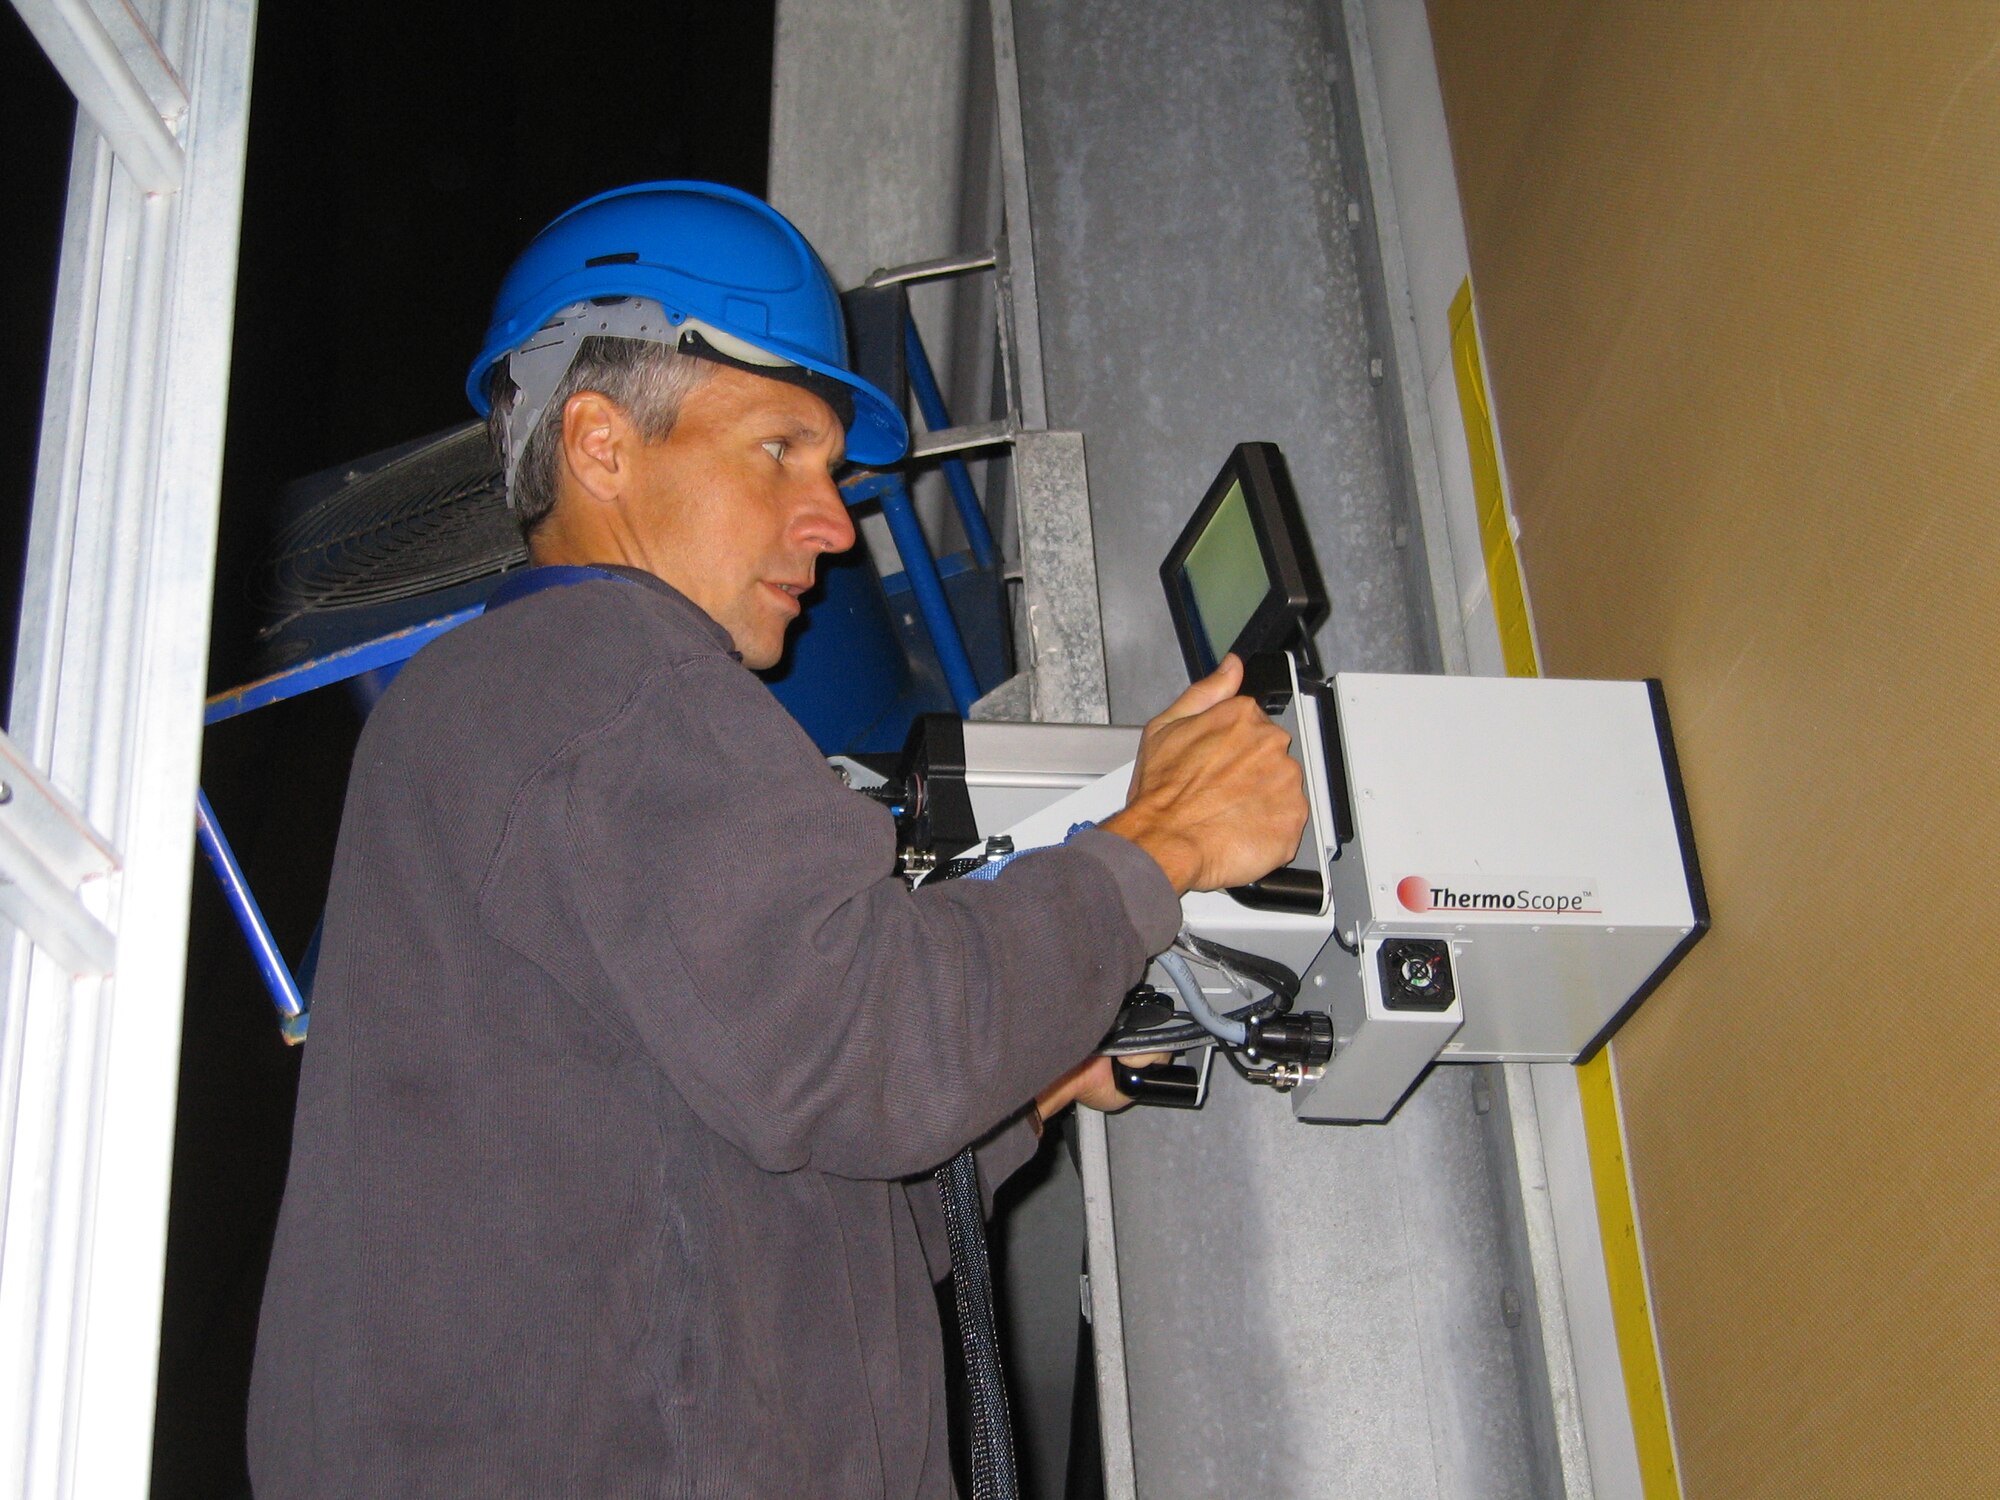 Mr. Kenneth LaCivita, an AFRL/RX engineer performs a thermography inspection in Vardo, Norway.